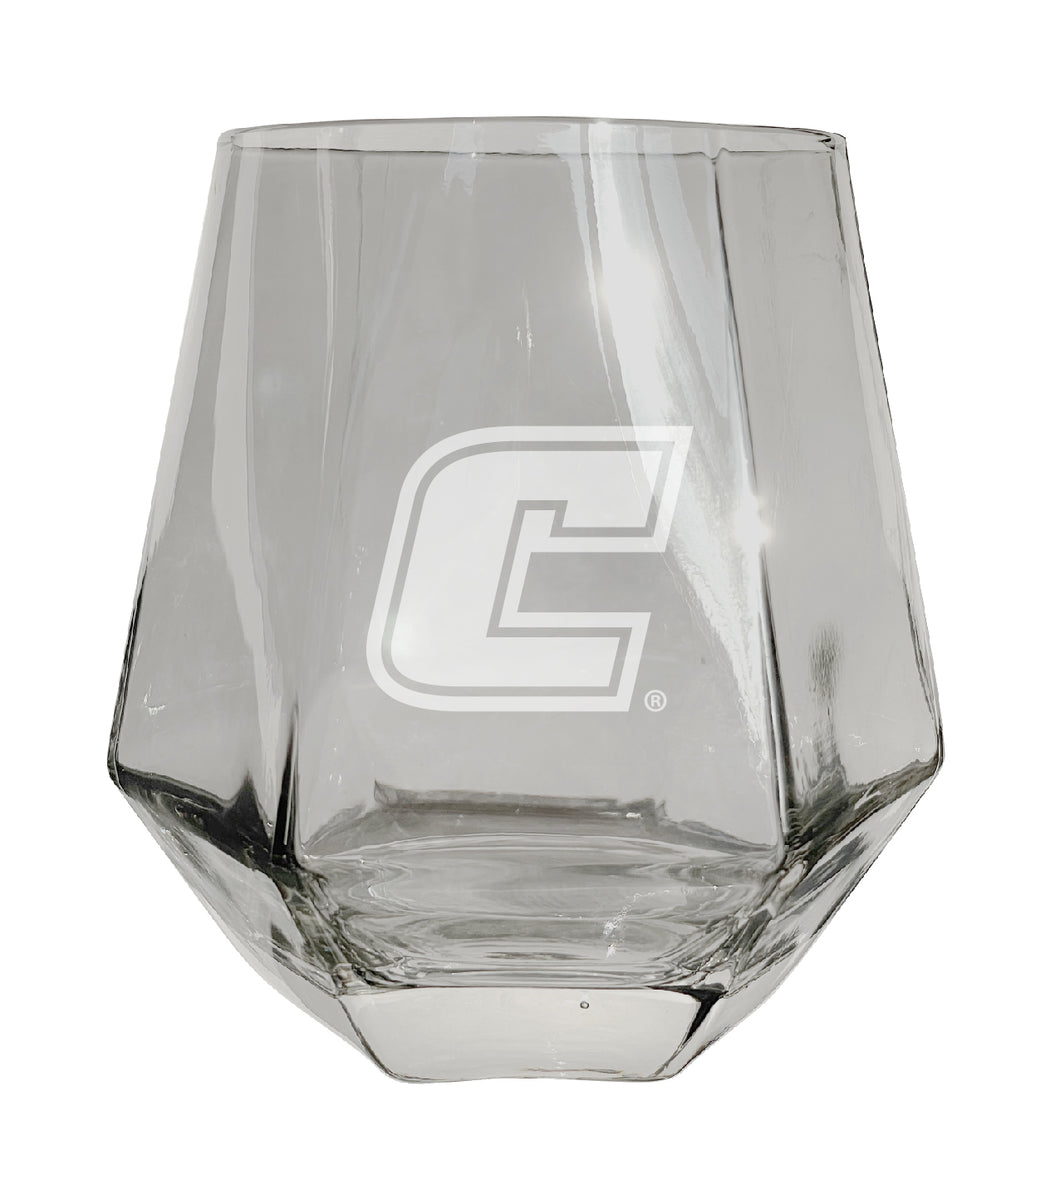 University of Tennessee at Chattanooga Tigers Etched Diamond Cut 10 oz Stemless Wine Glass - NCAA Licensed